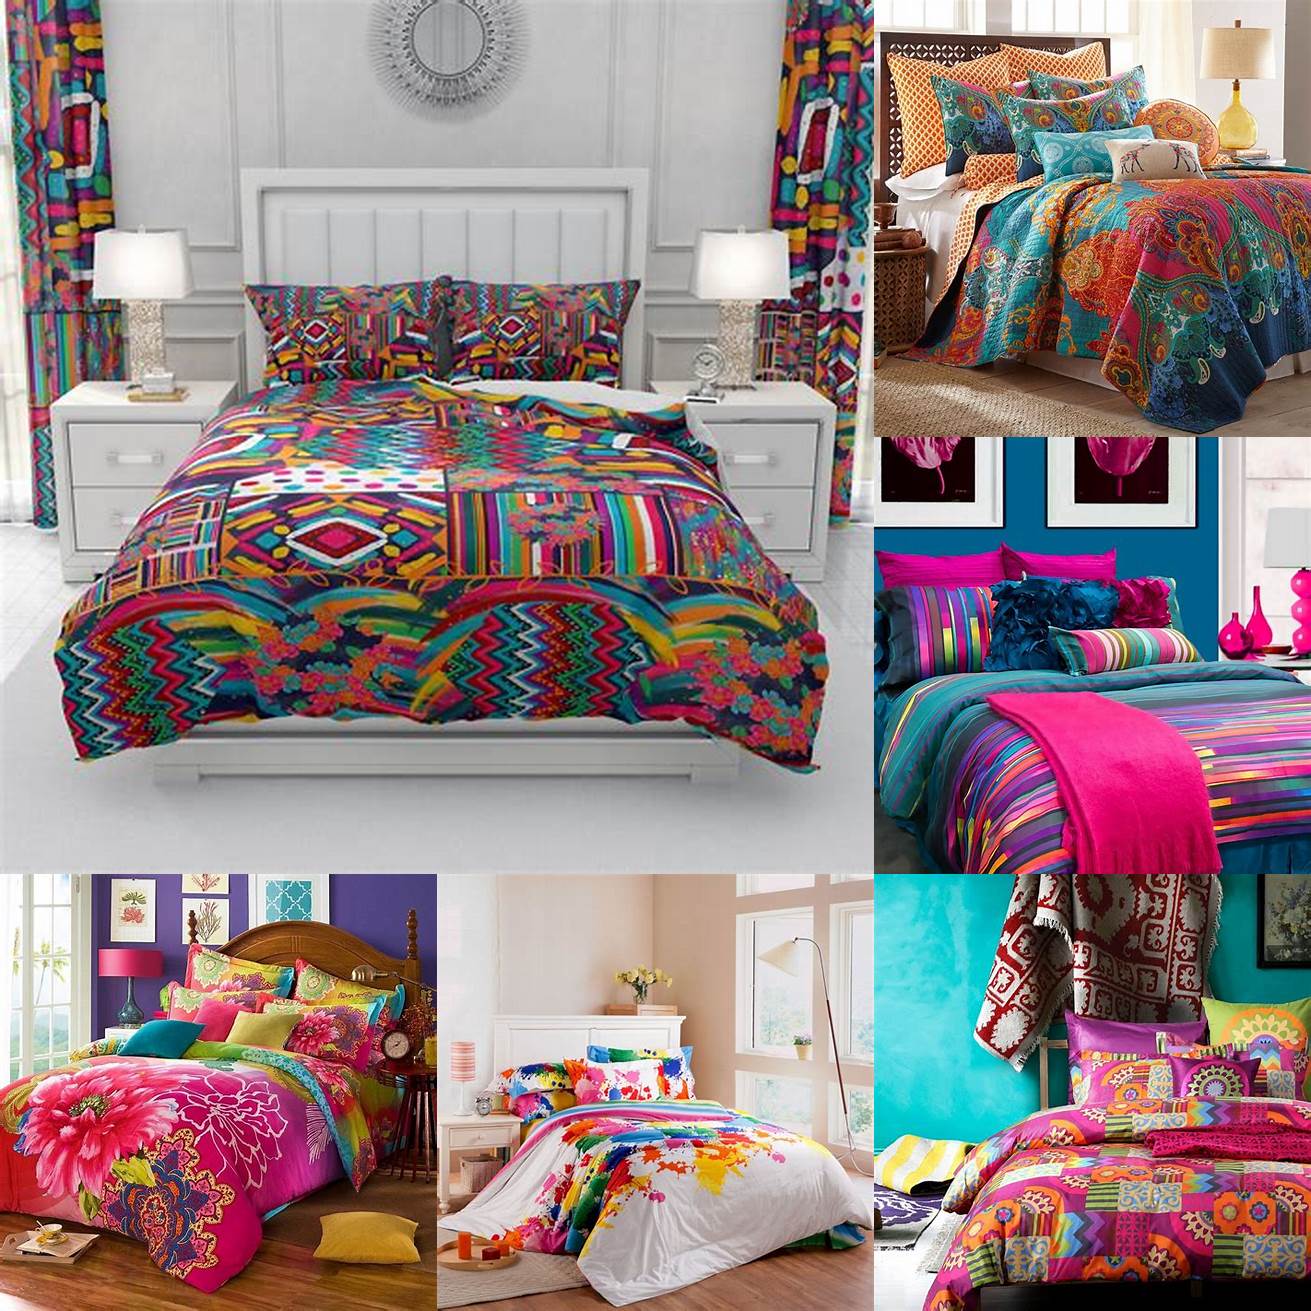 A colorful bed set for your bedroom